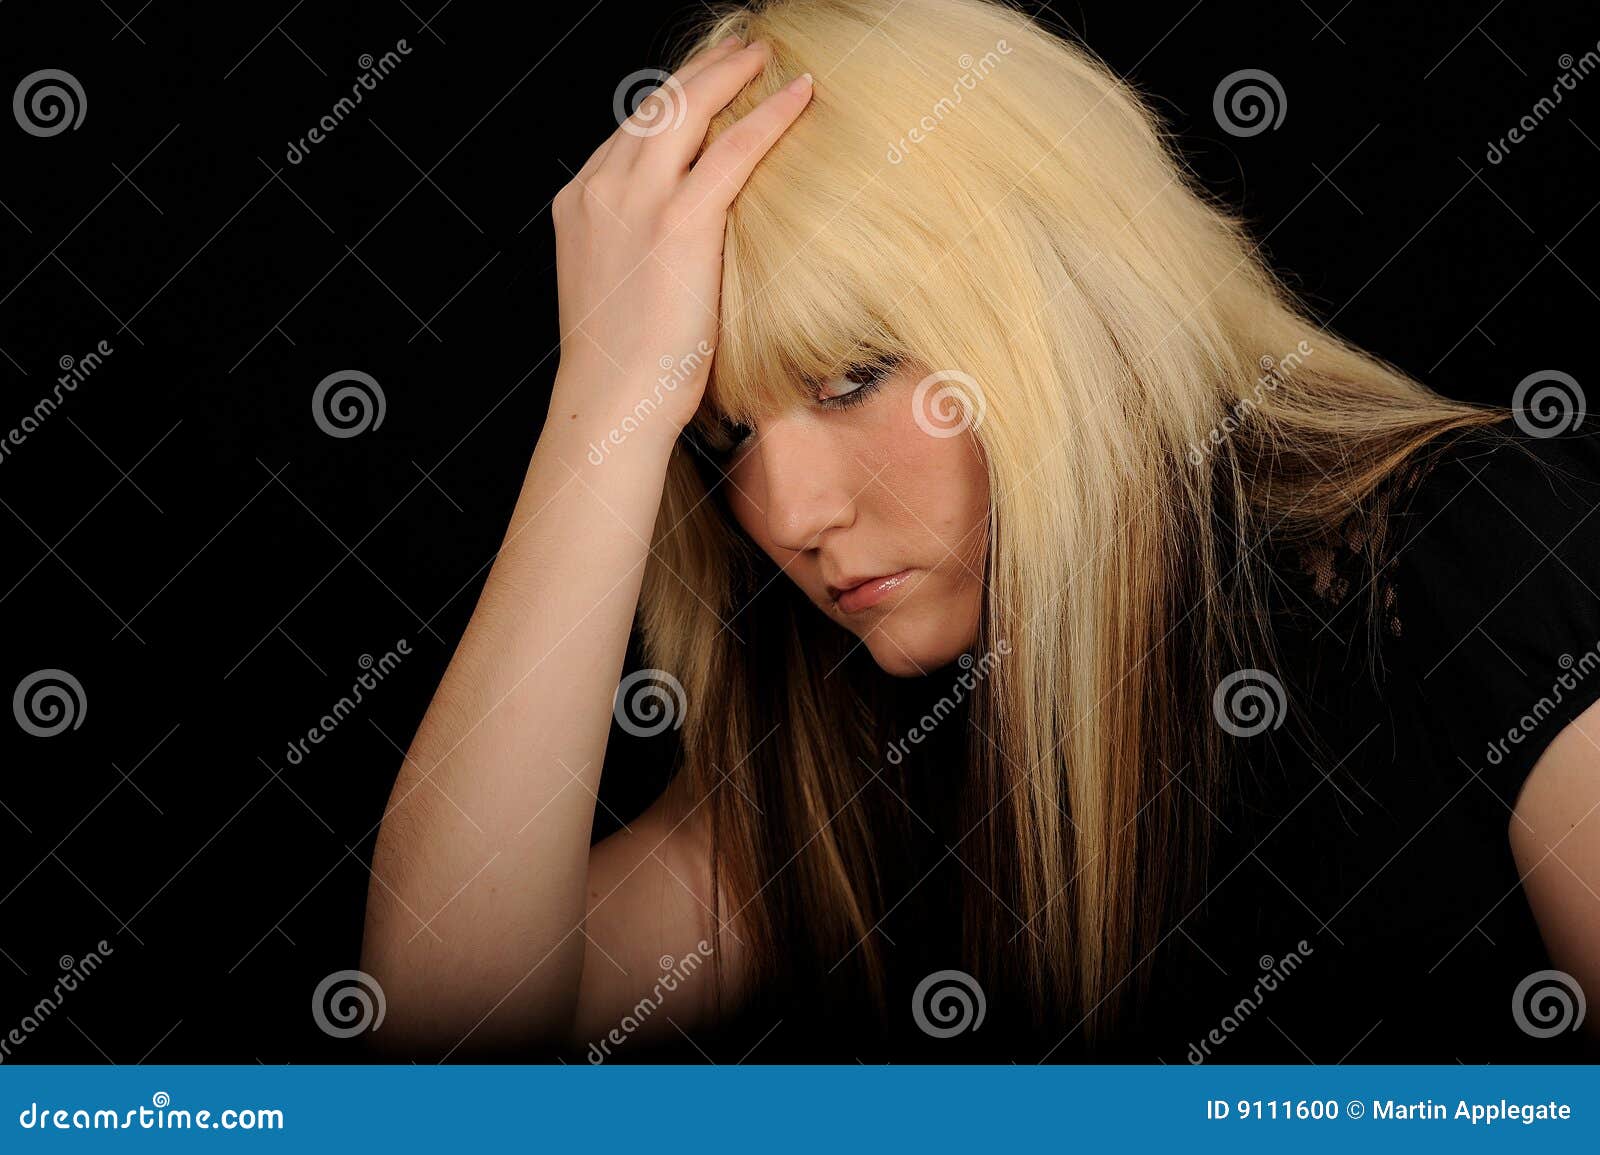 Profile Of Sad Woman With Long Hair In Tears, Depression Concept Artwork  Stock Photo, Picture and Royalty Free Image. Image 86214640.